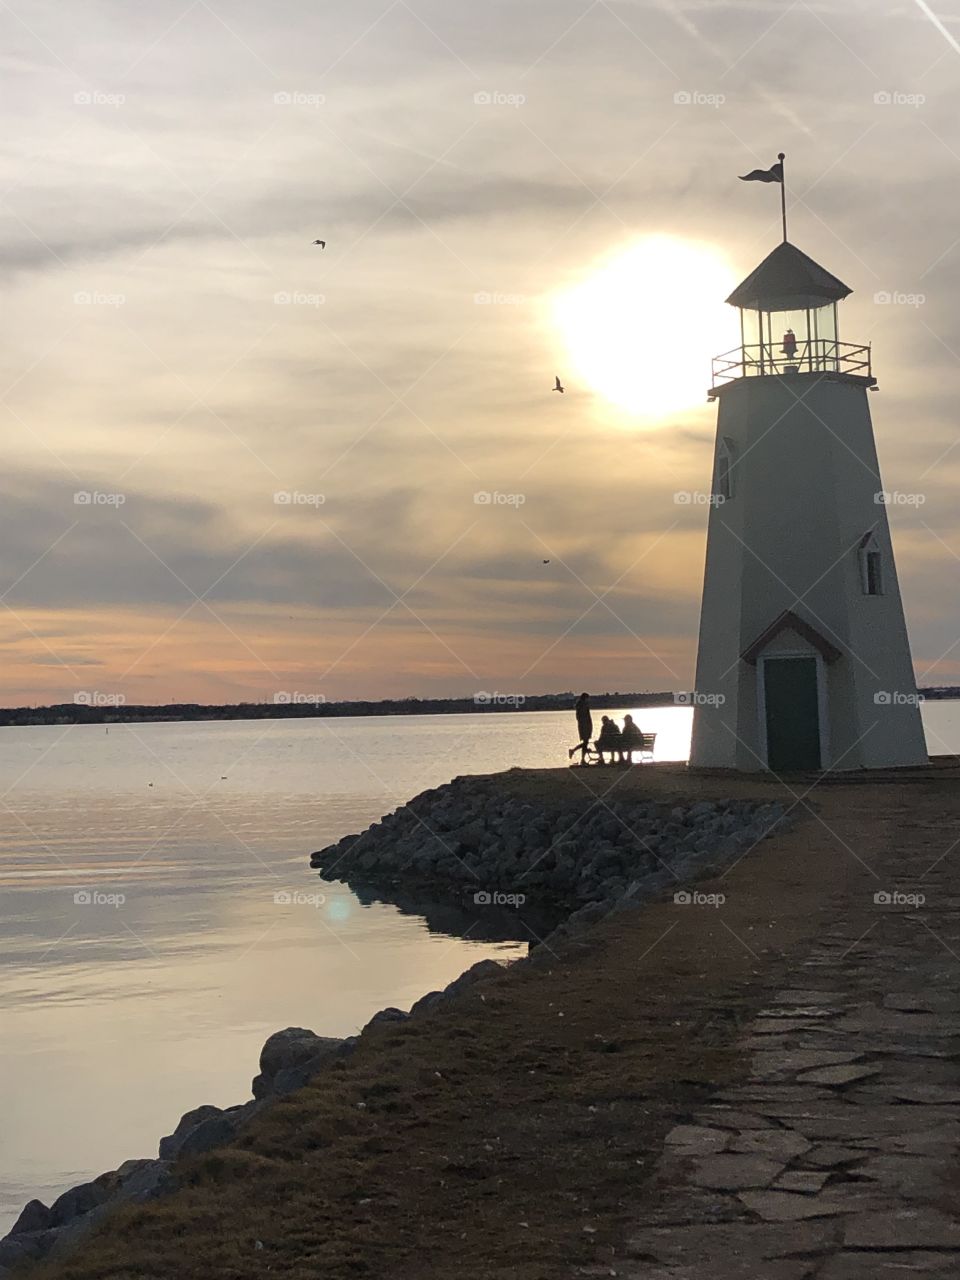 Beautiful sunset by the lake with a lighthouse 